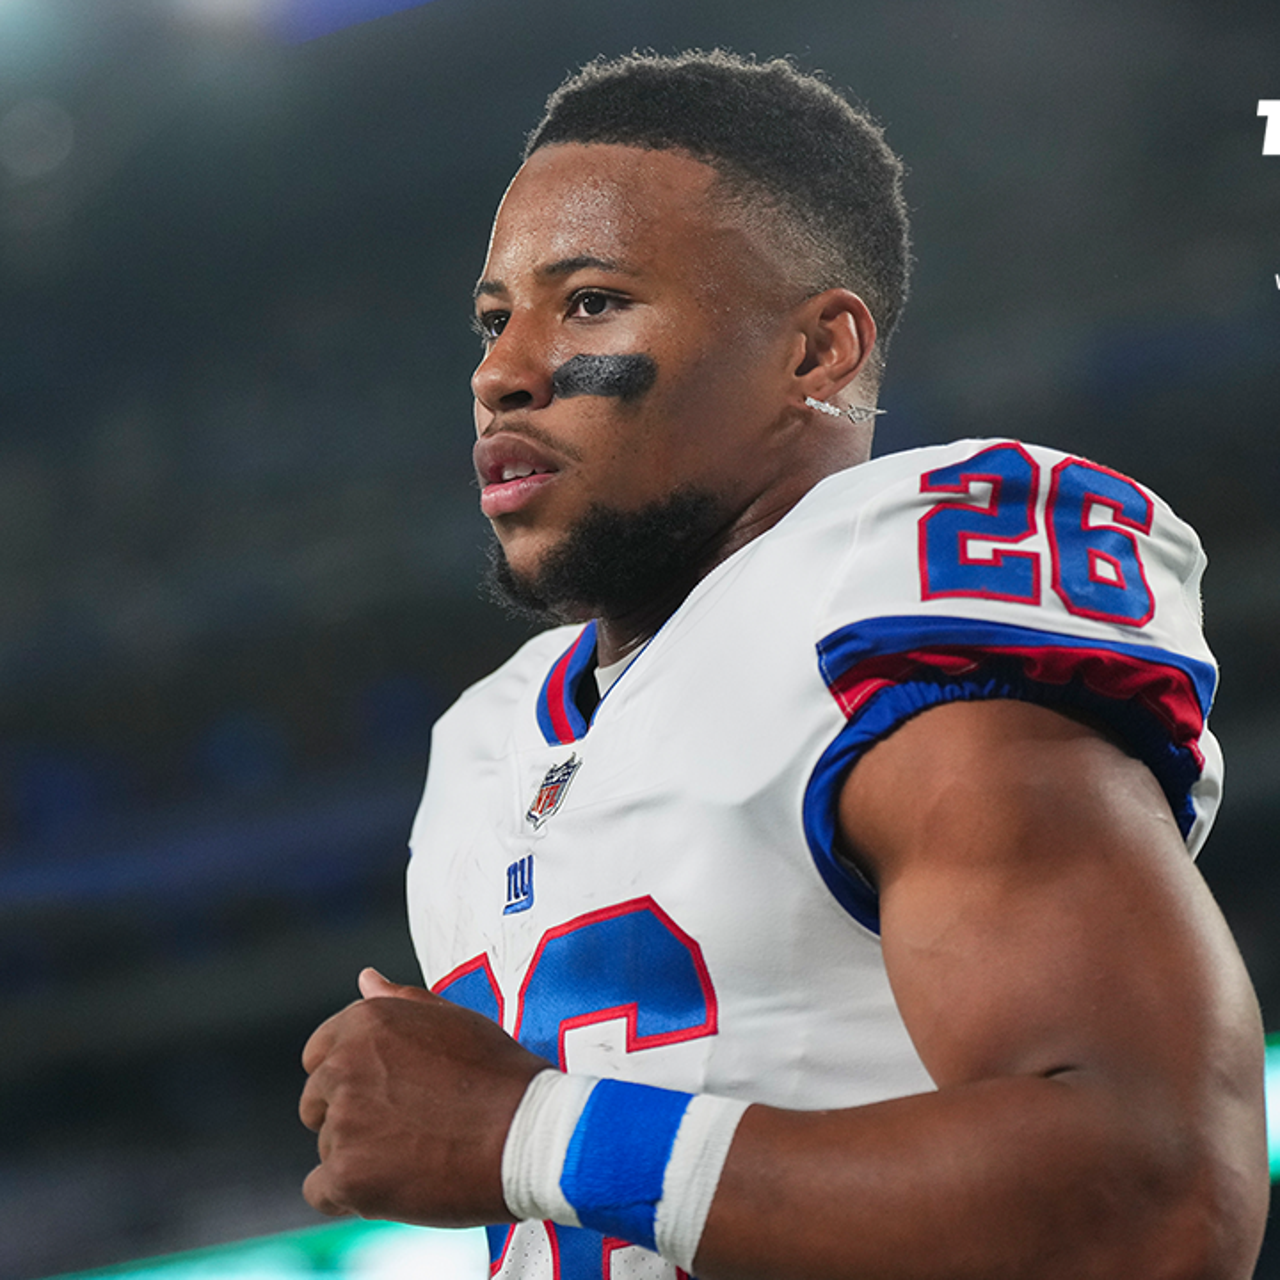 How will Saquon Barkley's contract situation impact the Giants this season?, THE HERD